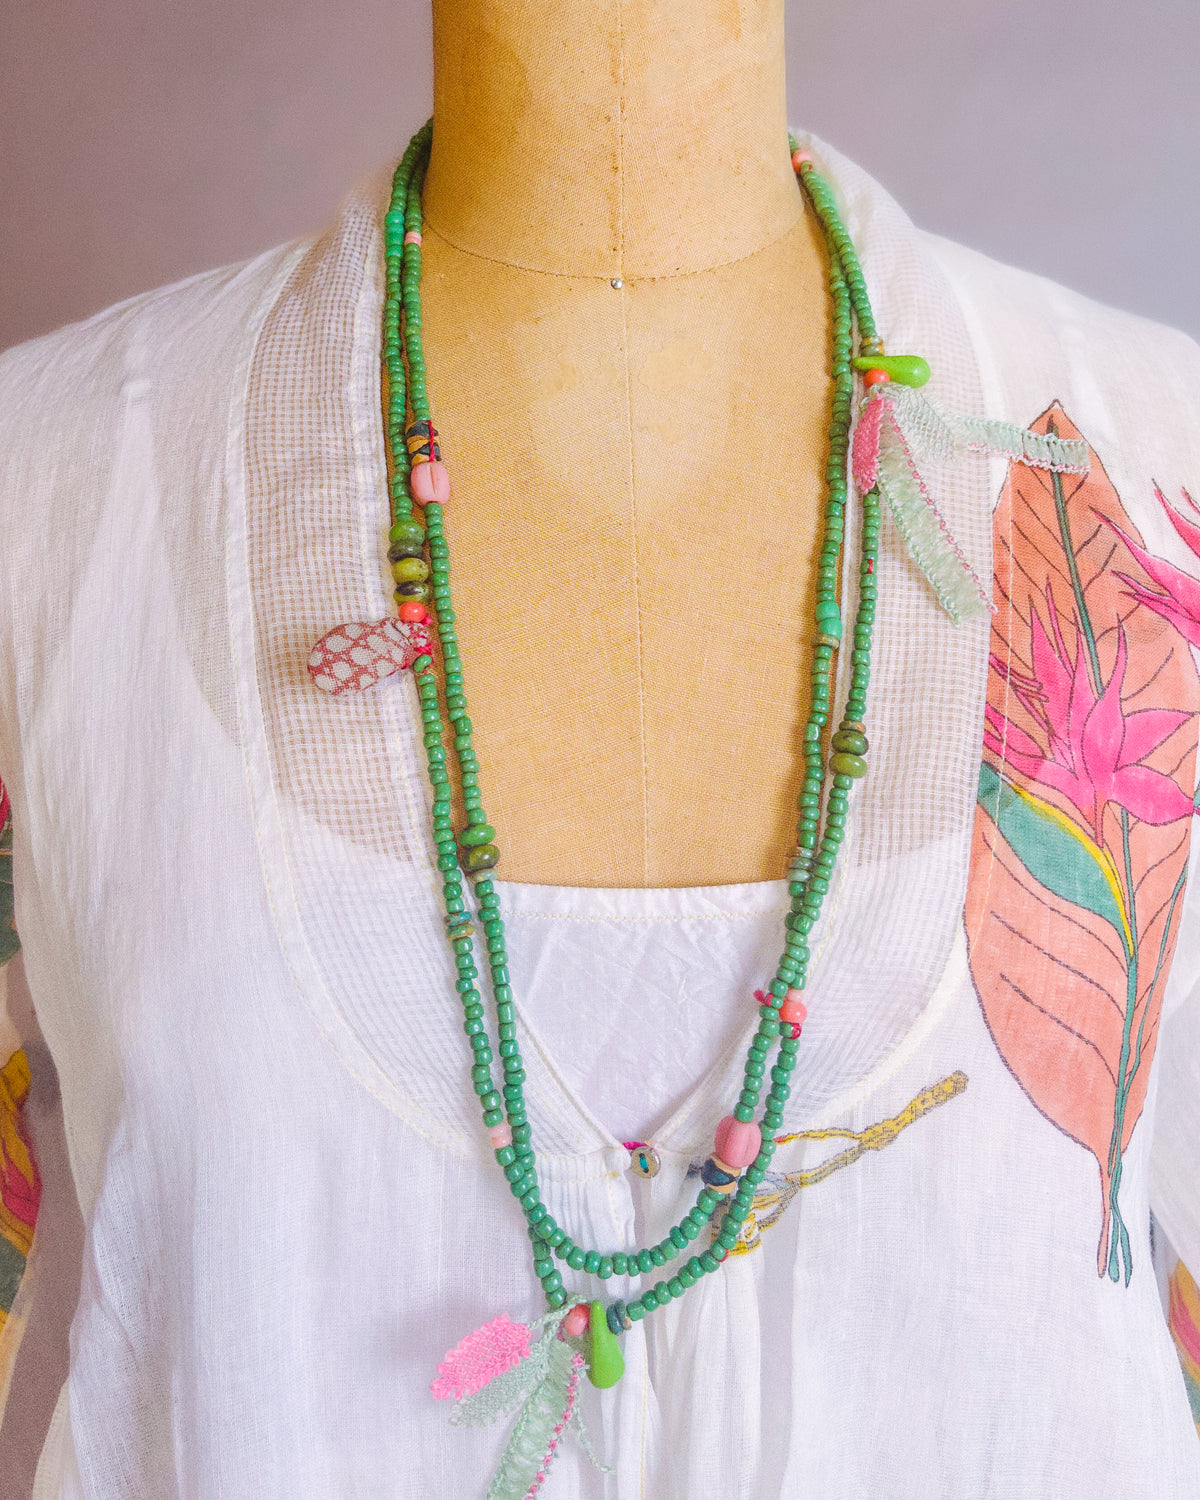 Handmade Beaded Necklaces by Tatter